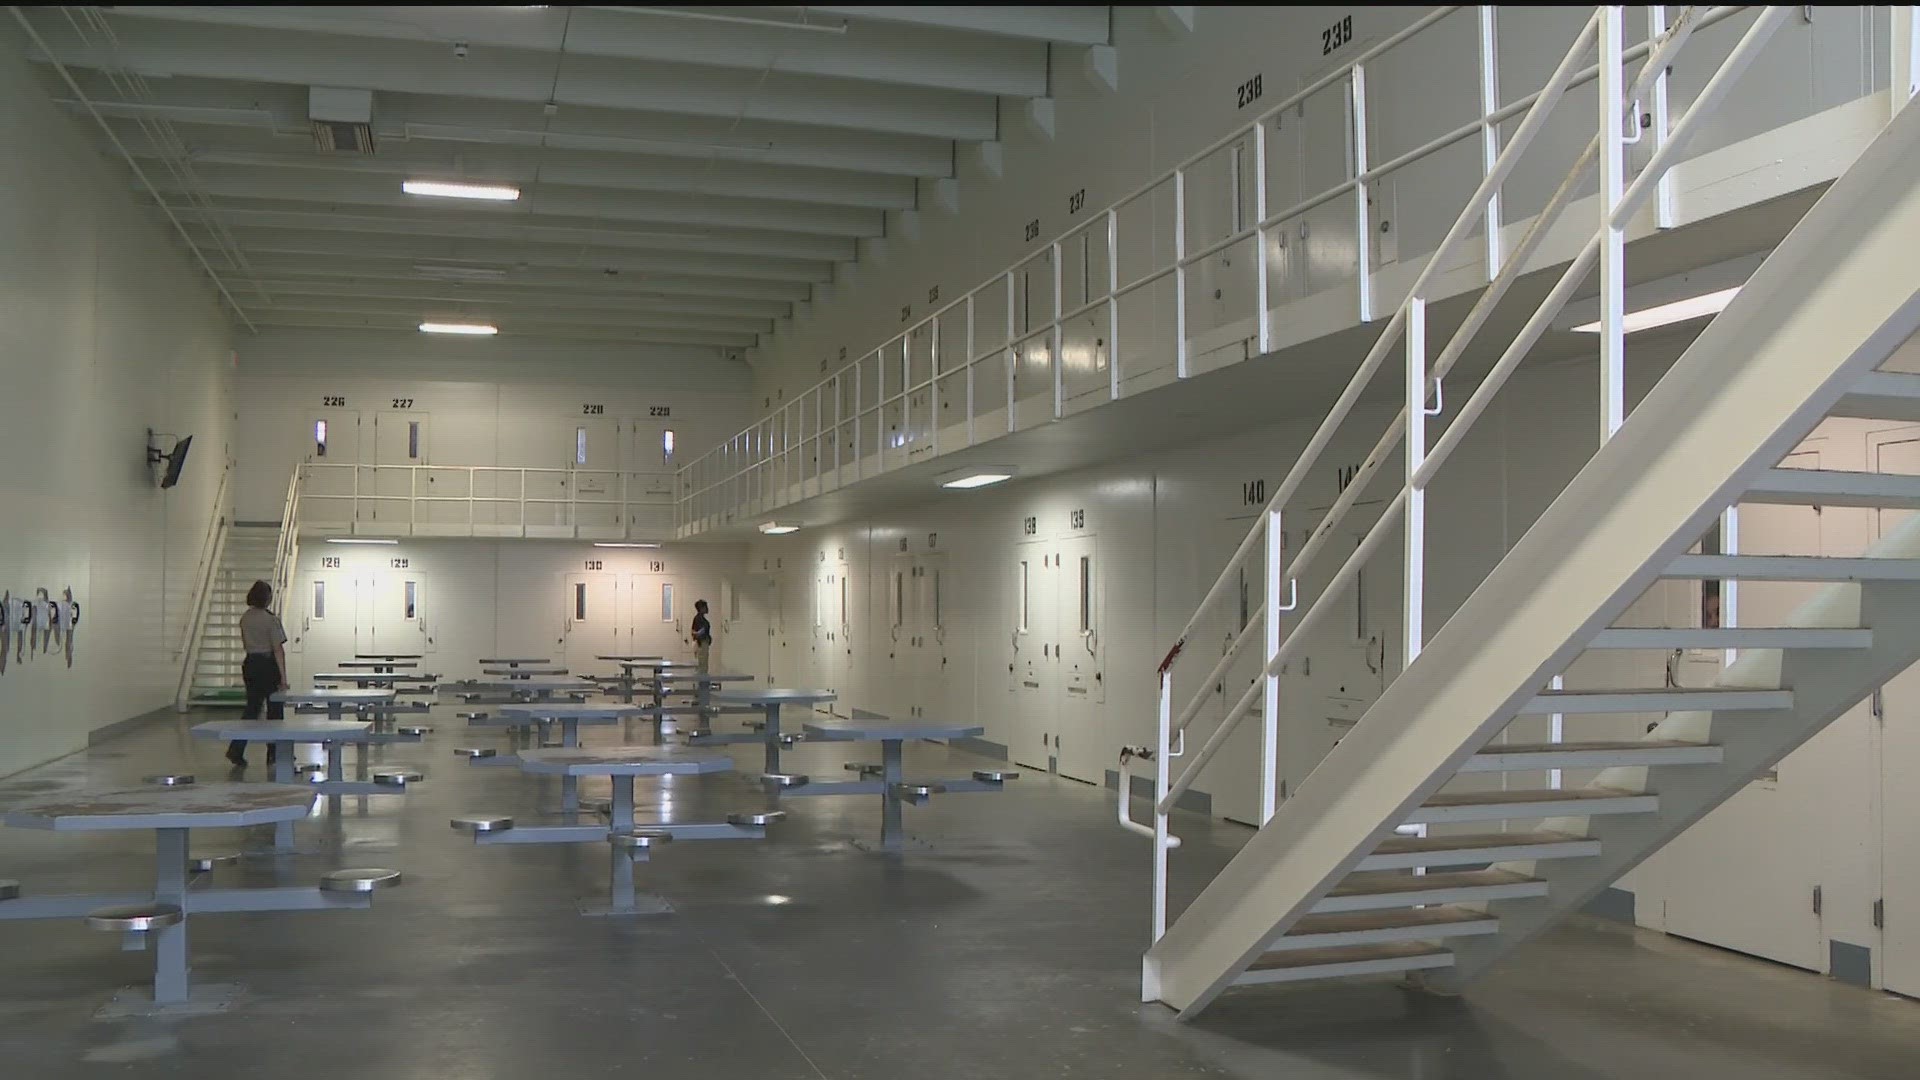 The current employee said they're lucky to have six to eight officers show up on a shift inside the jail that houses close to 900 inmates.